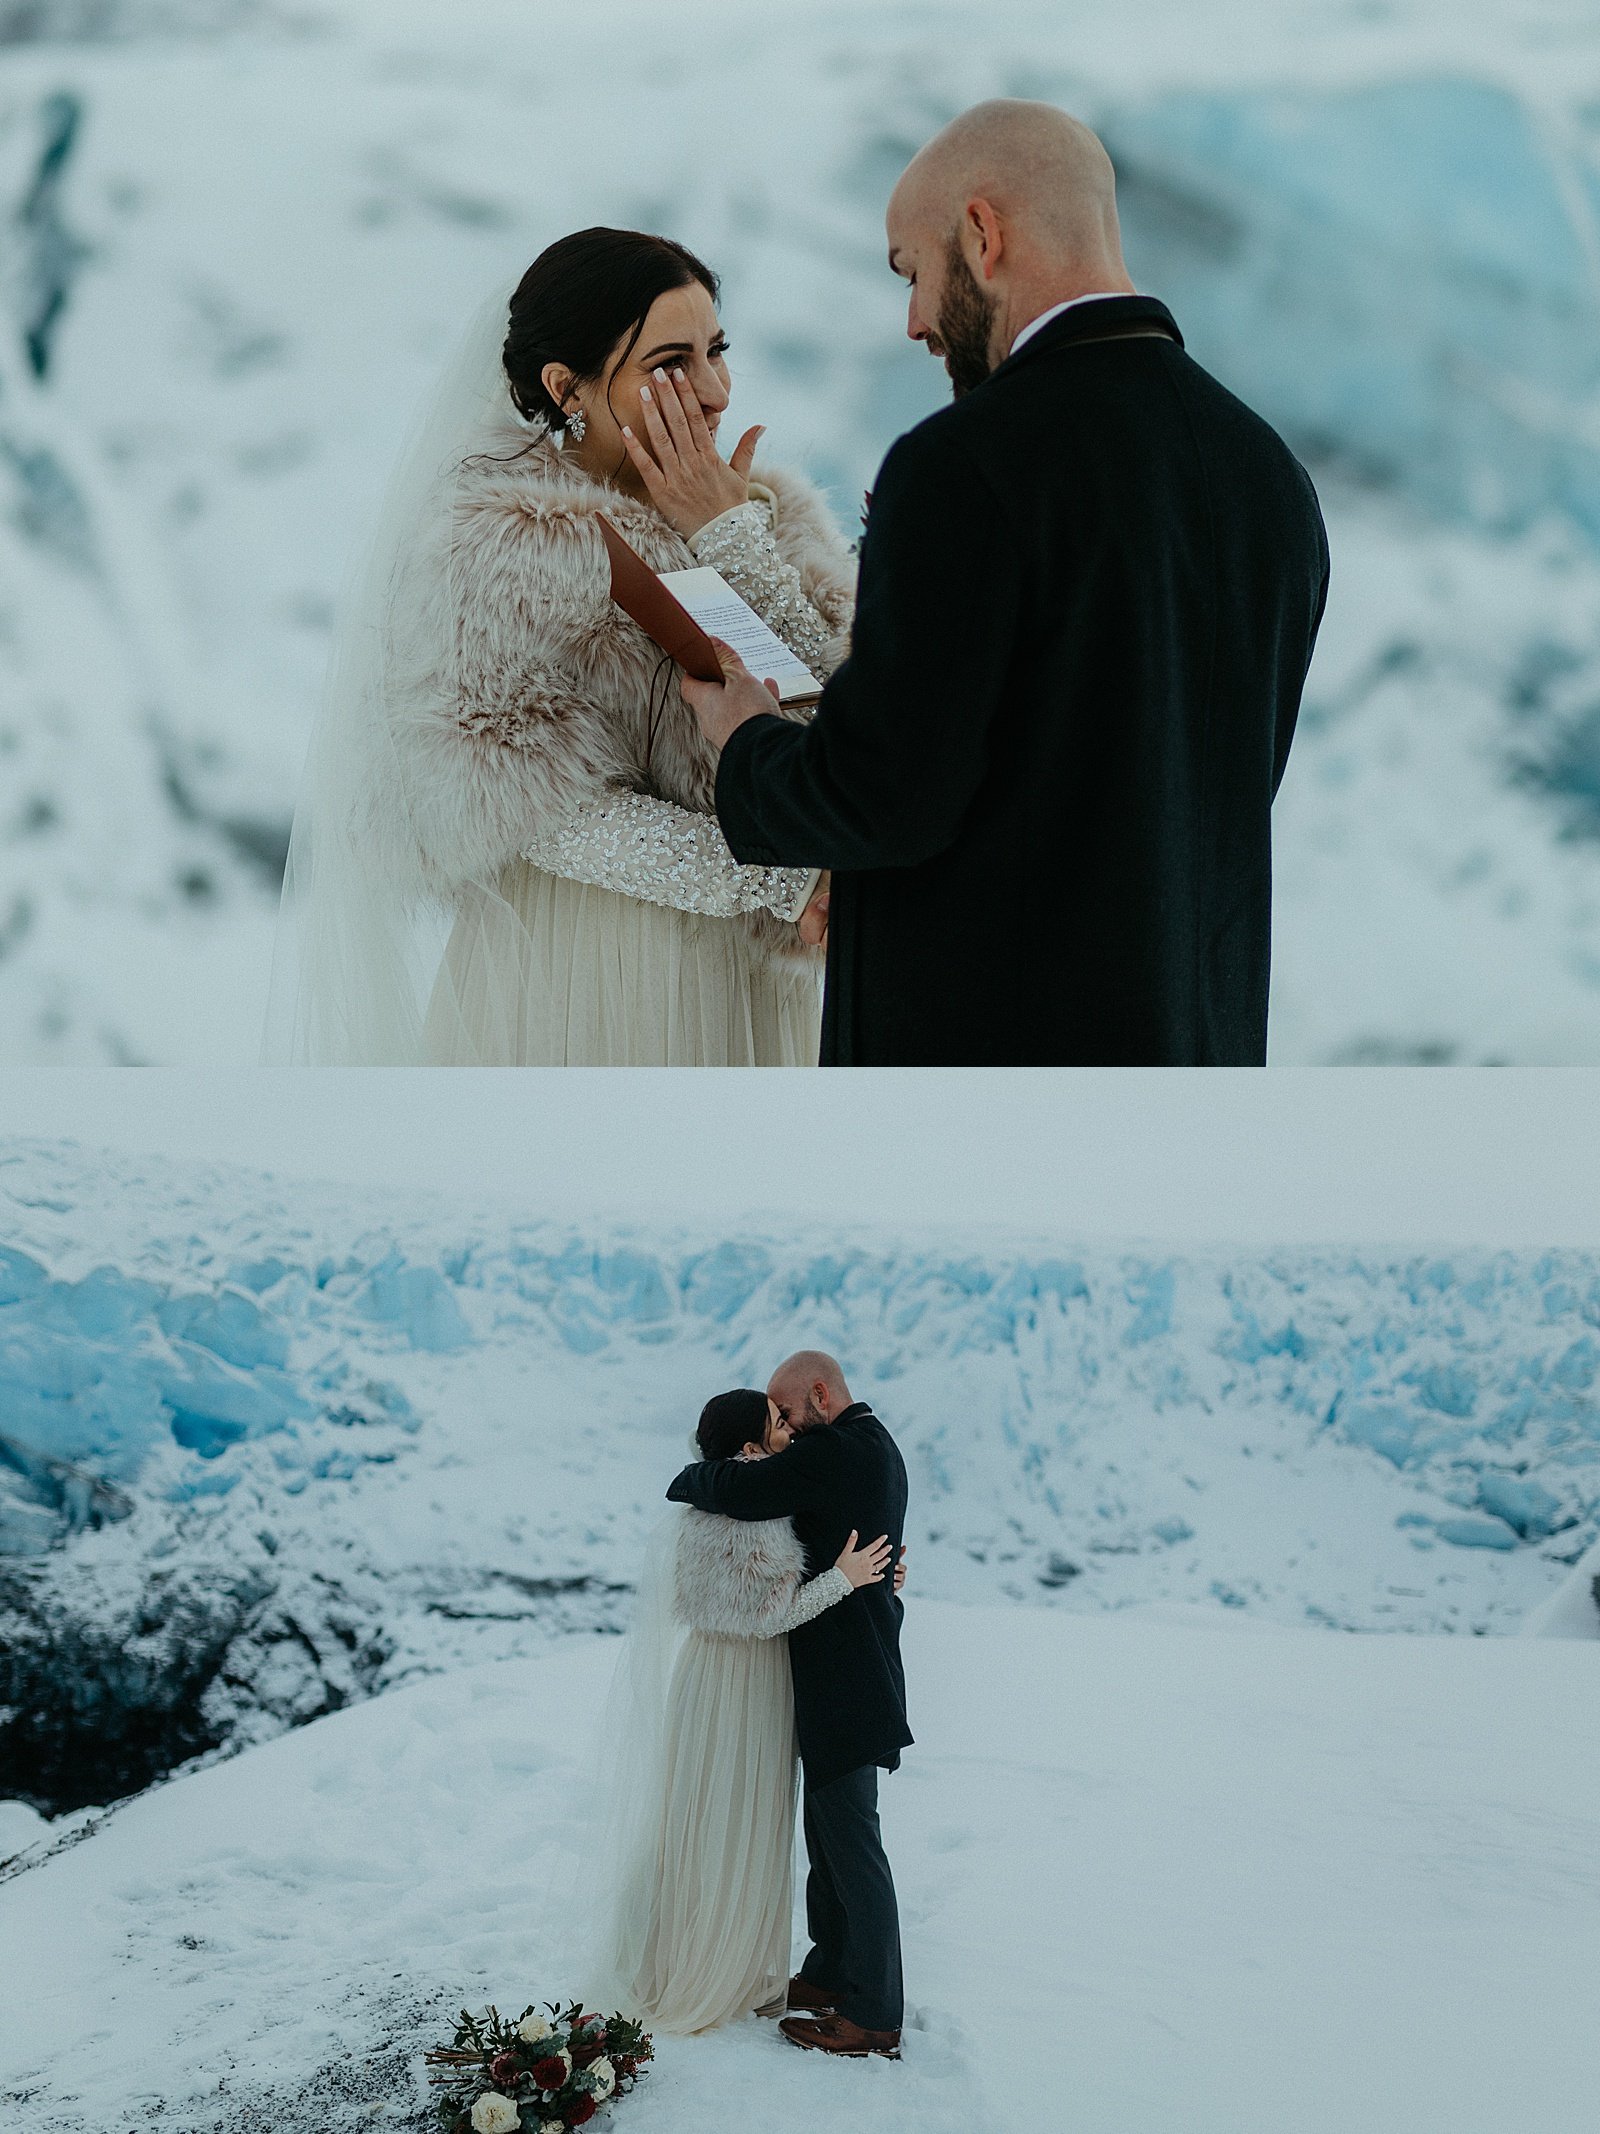  Newlyweds kissing in the snow after their intimate wedding ceremony  